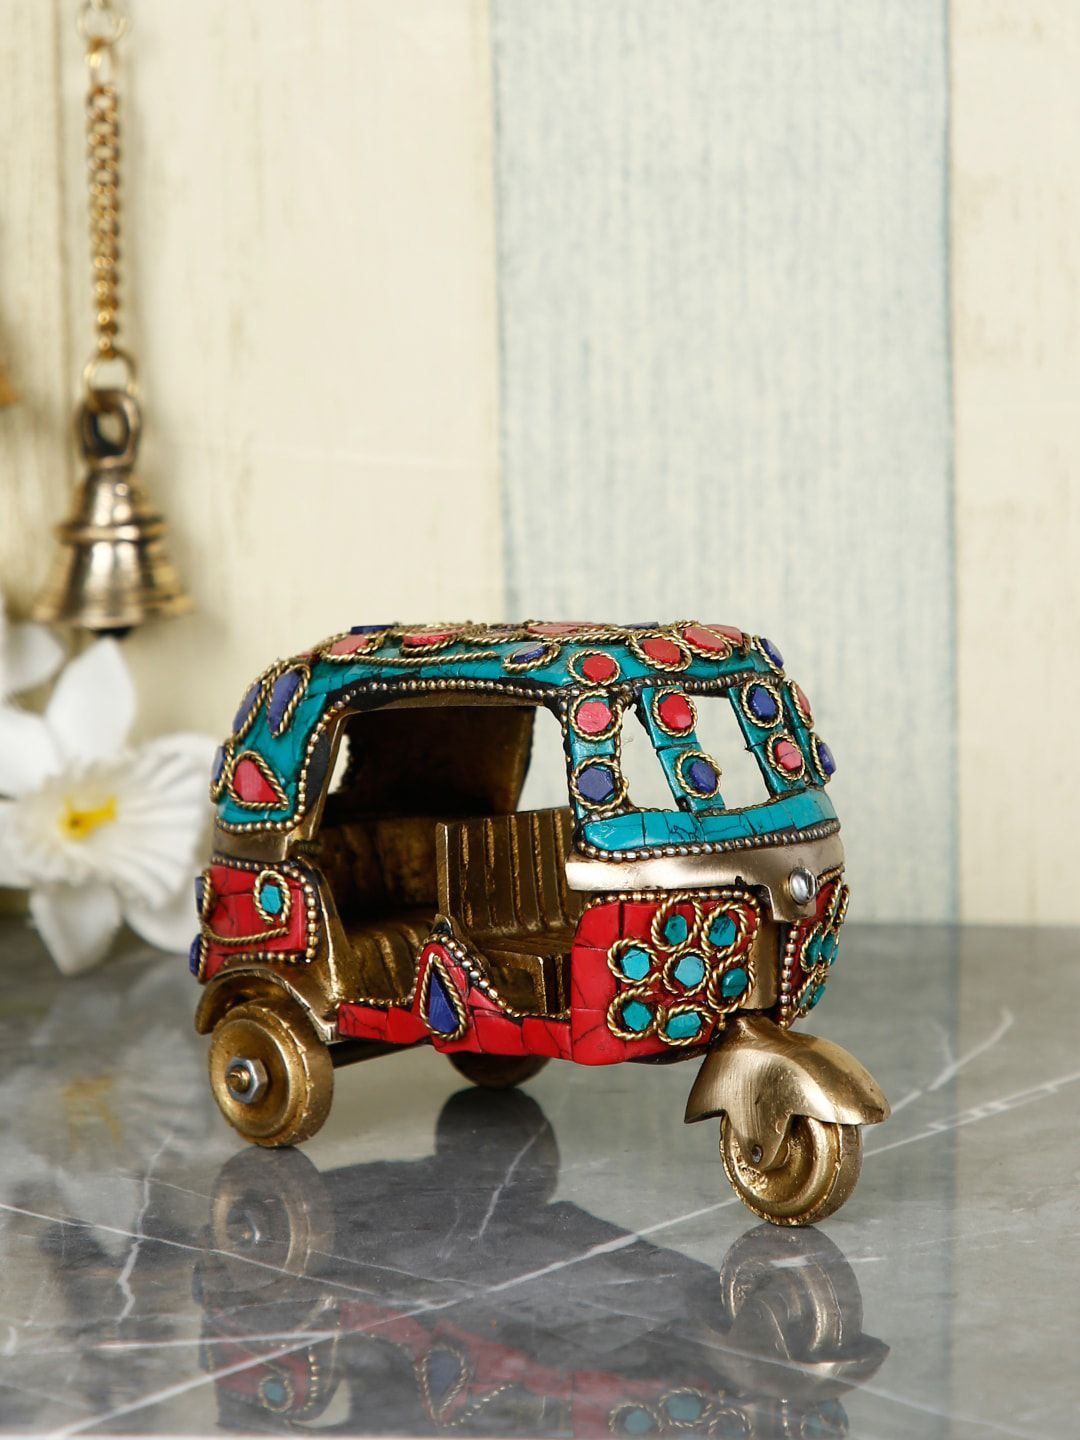 CraftVatika Gold-Toned & Red Hand-Crafted Indian Auto Rickshaw Statue Showpiece Price in India